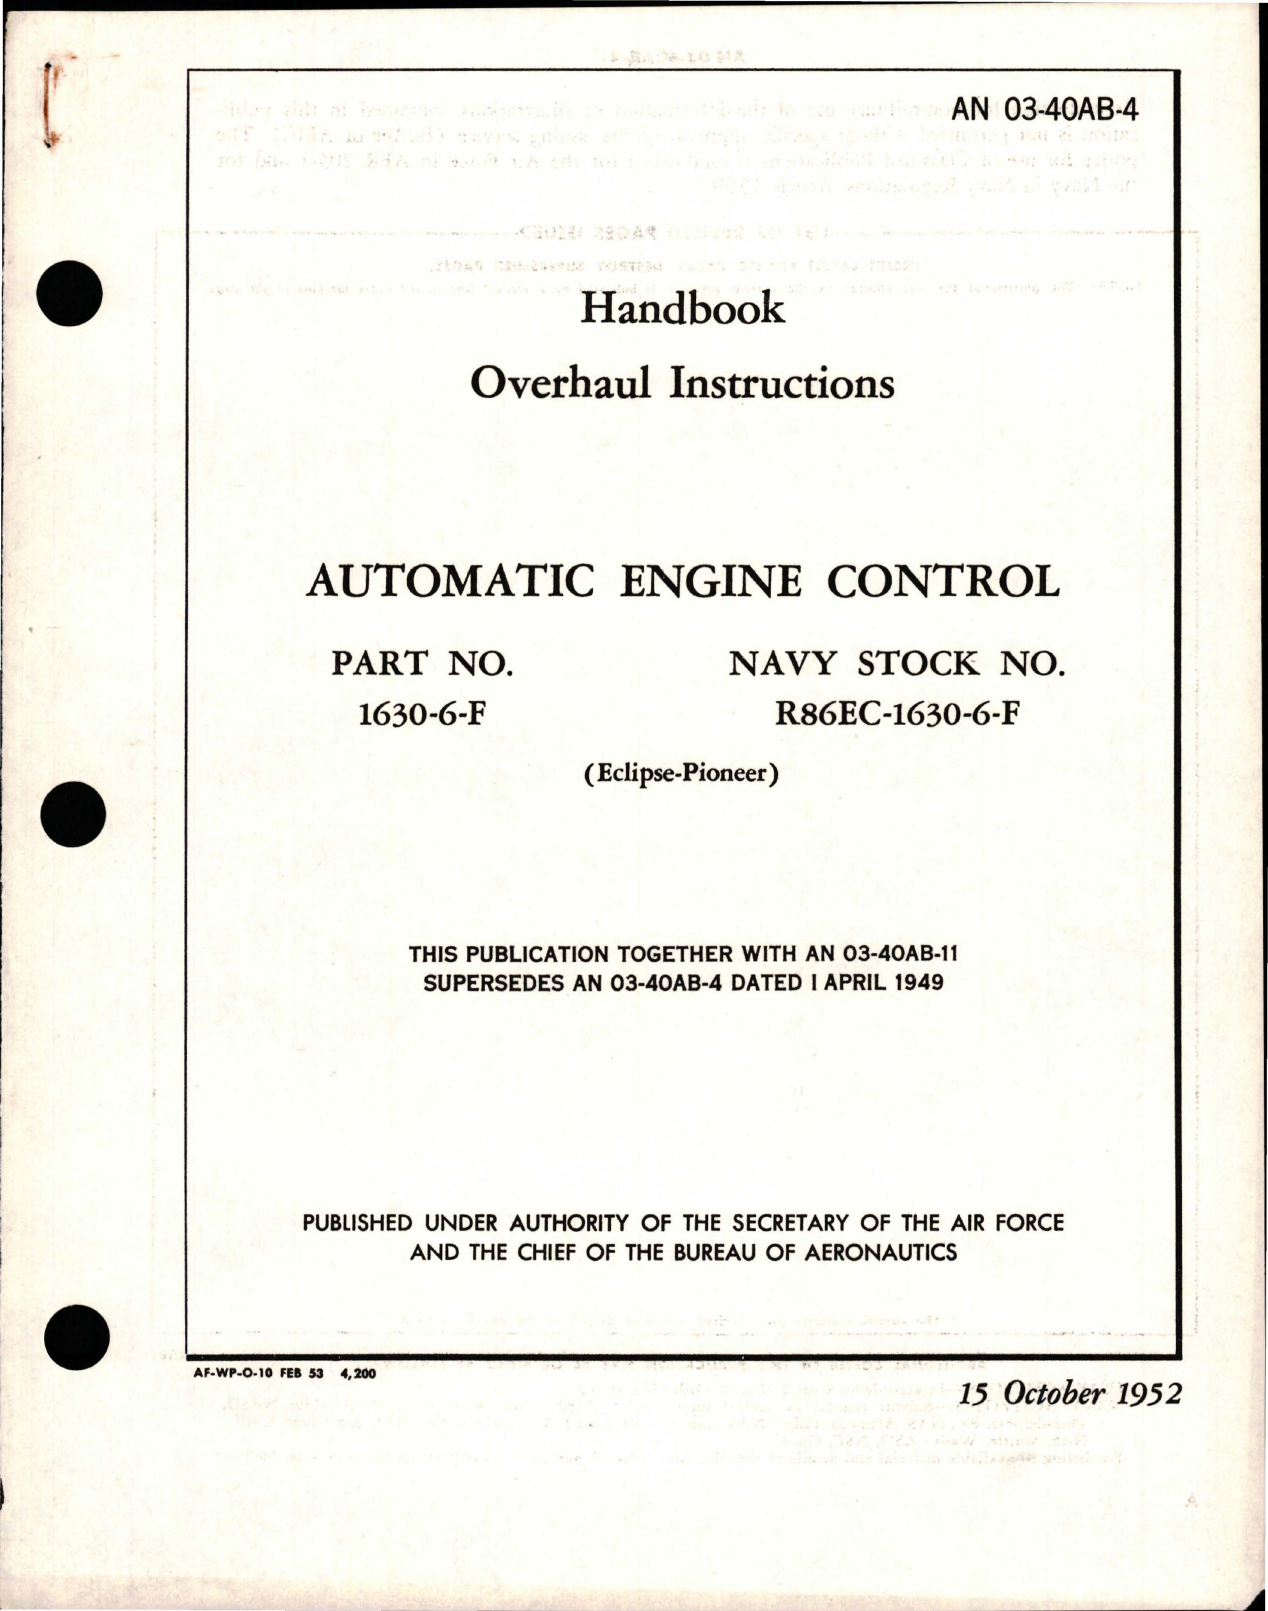 Sample page 1 from AirCorps Library document: Overhaul Instructions for Automatic Engine Control - Part 1630-6-F 